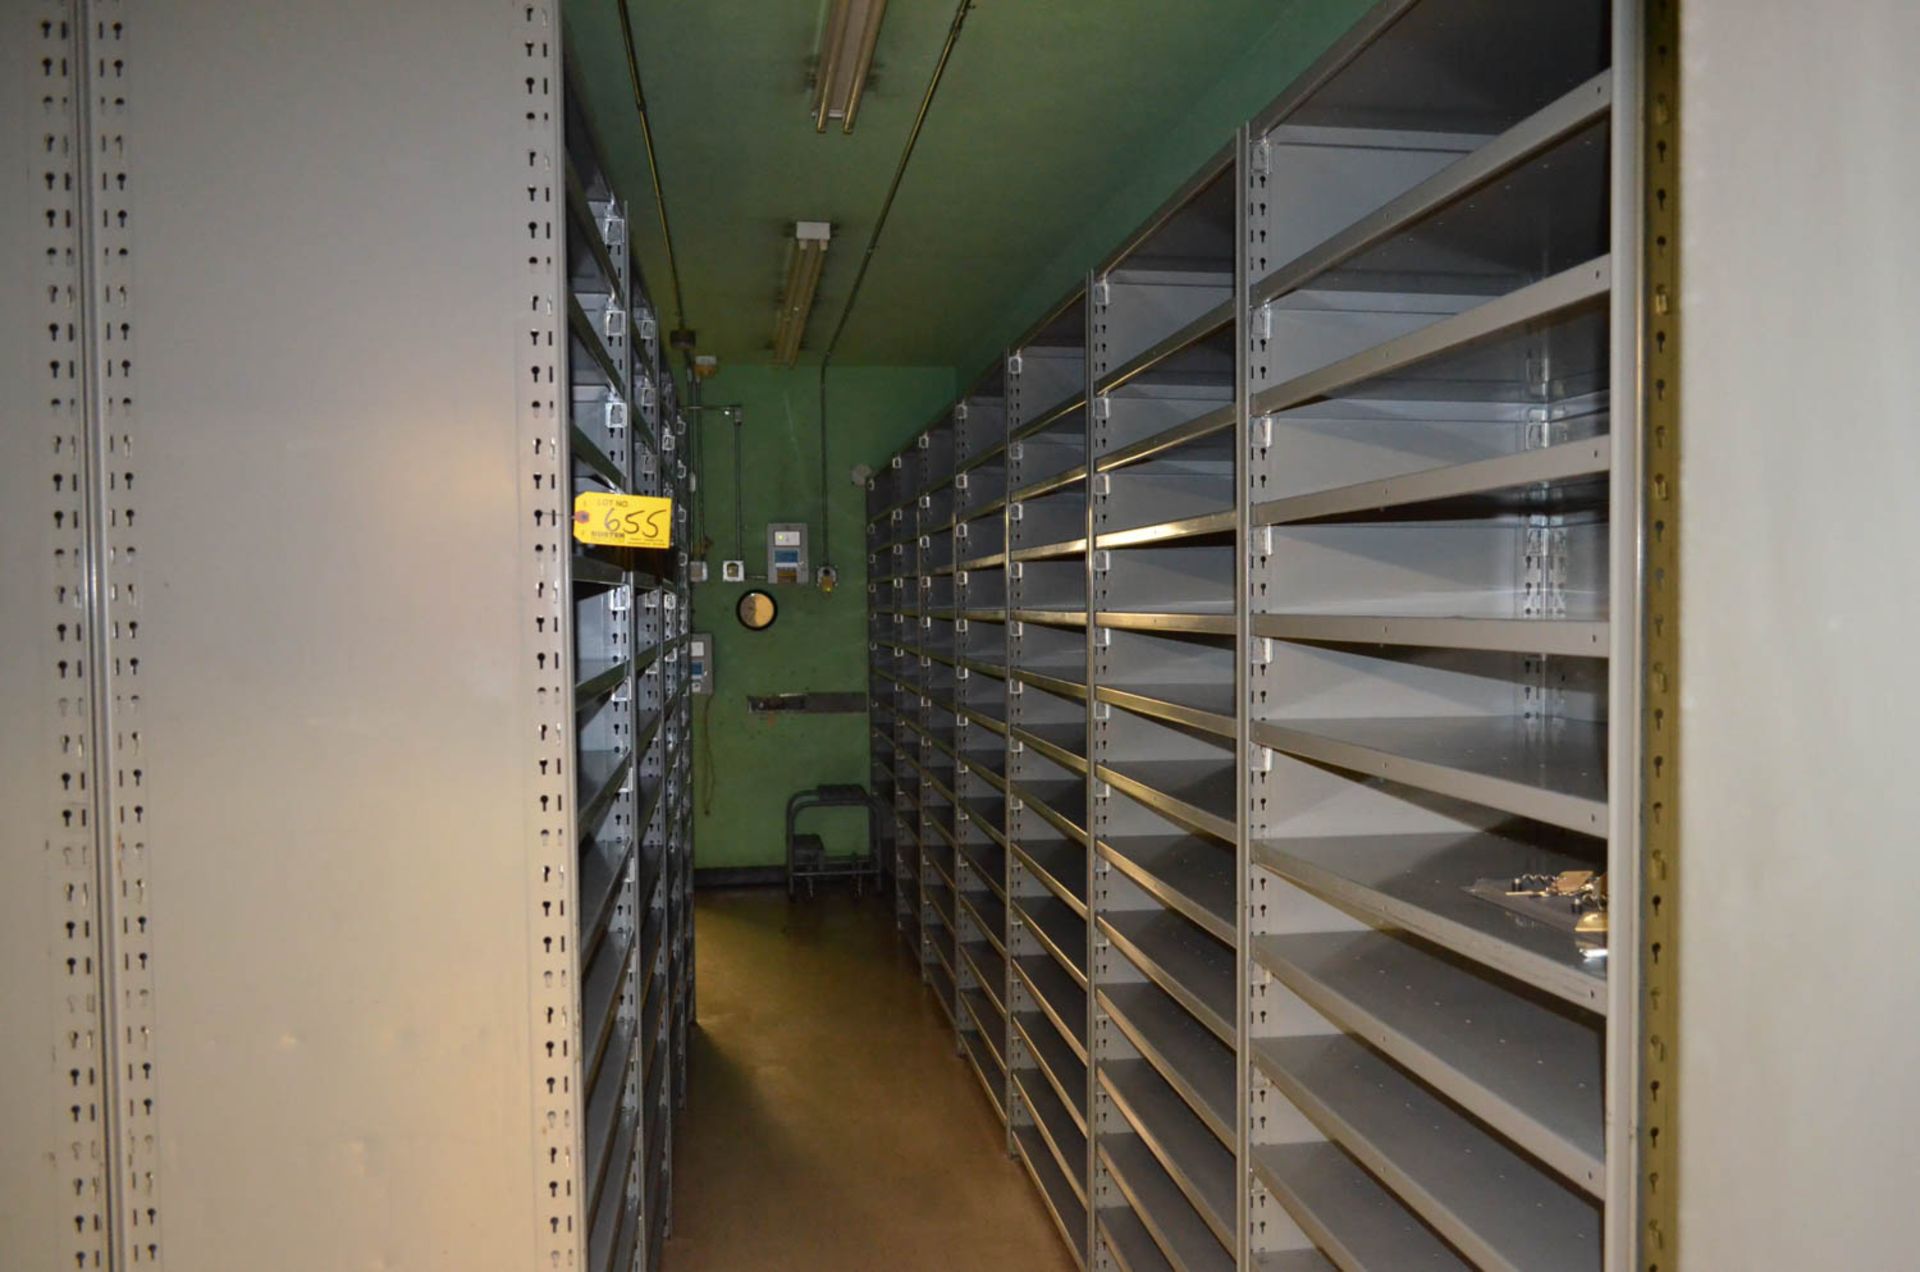 LOT OF SHELVING IN VAULT